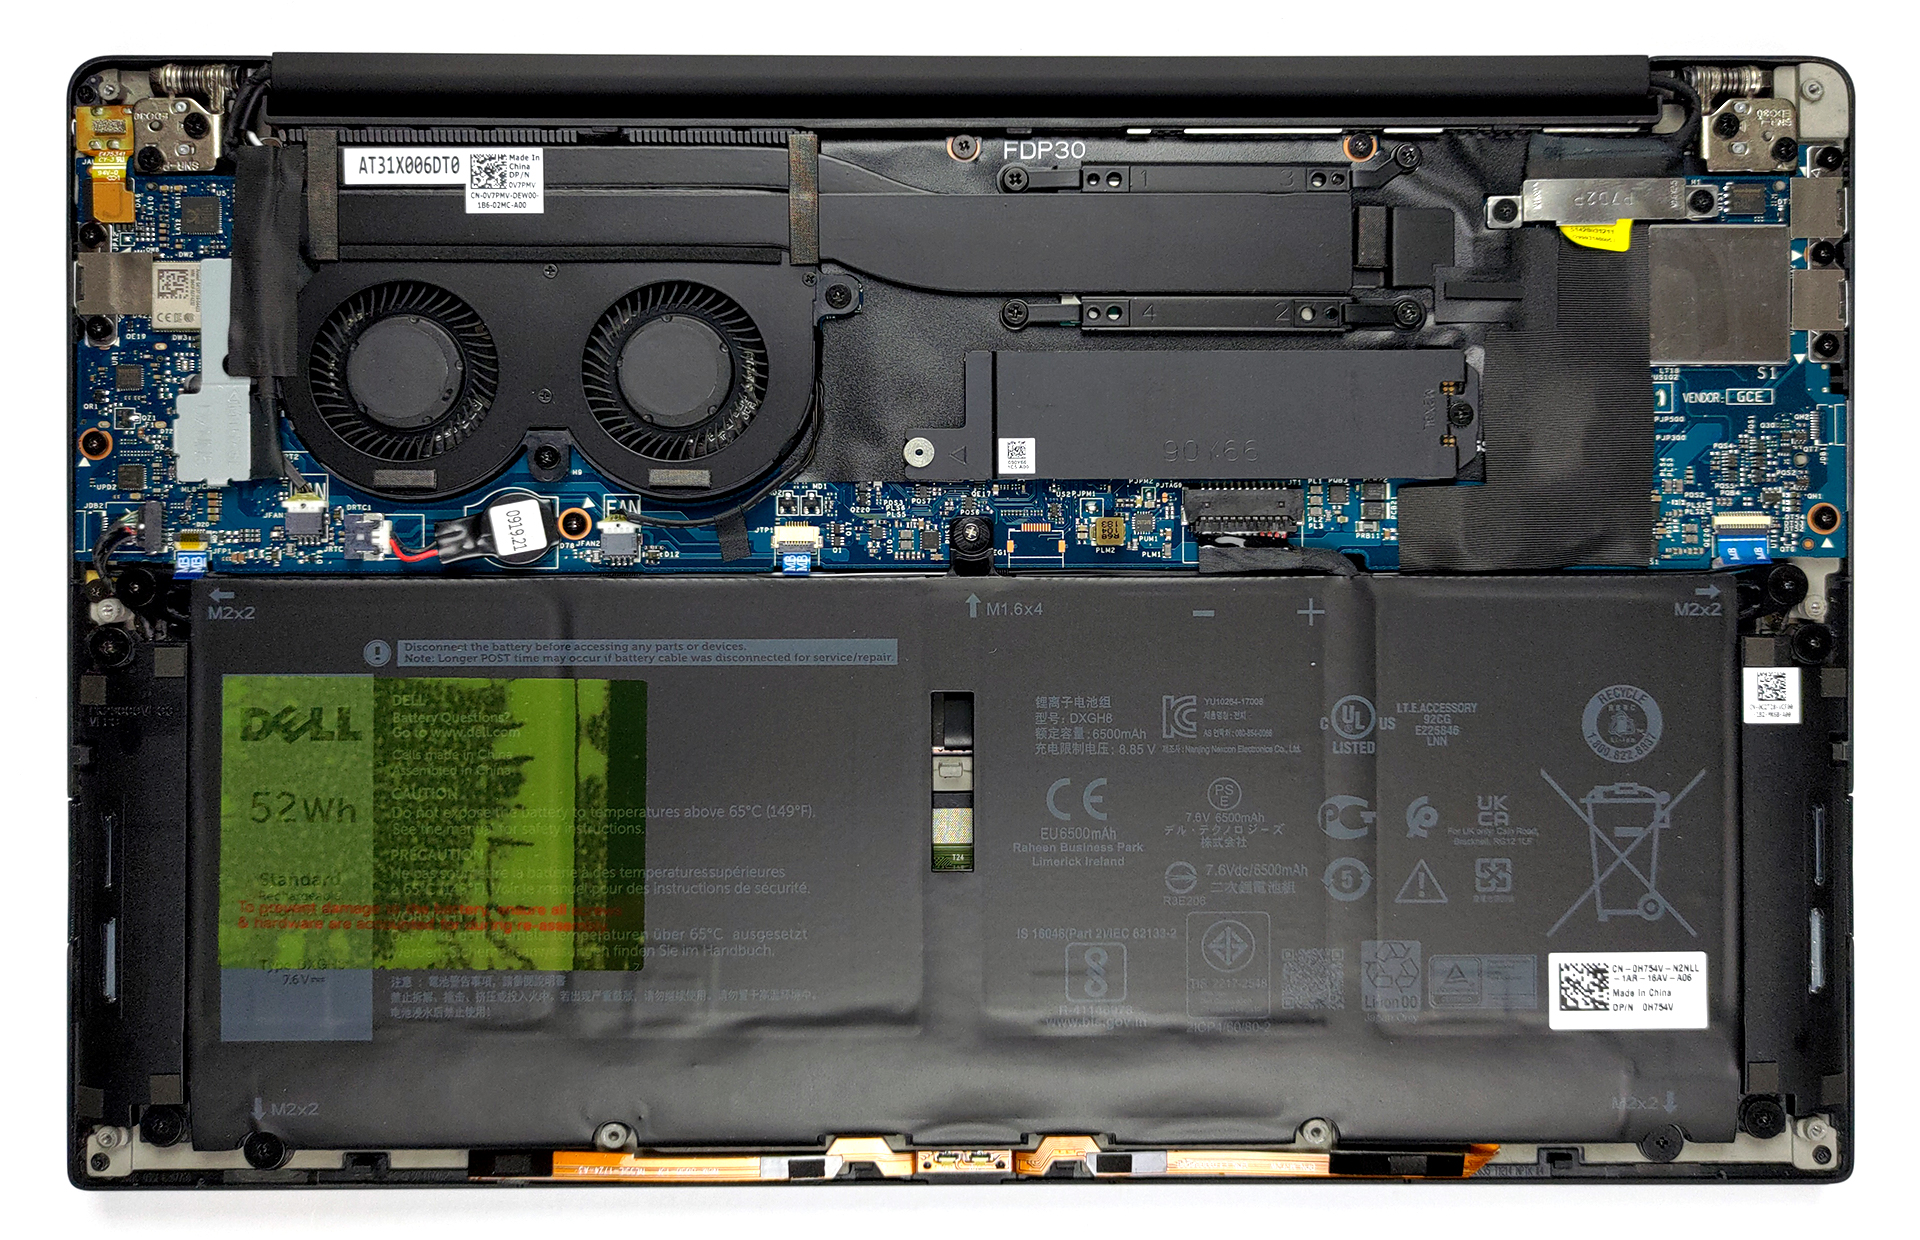 Inside Dell XPS 13 9305 - disassembly and upgrade options